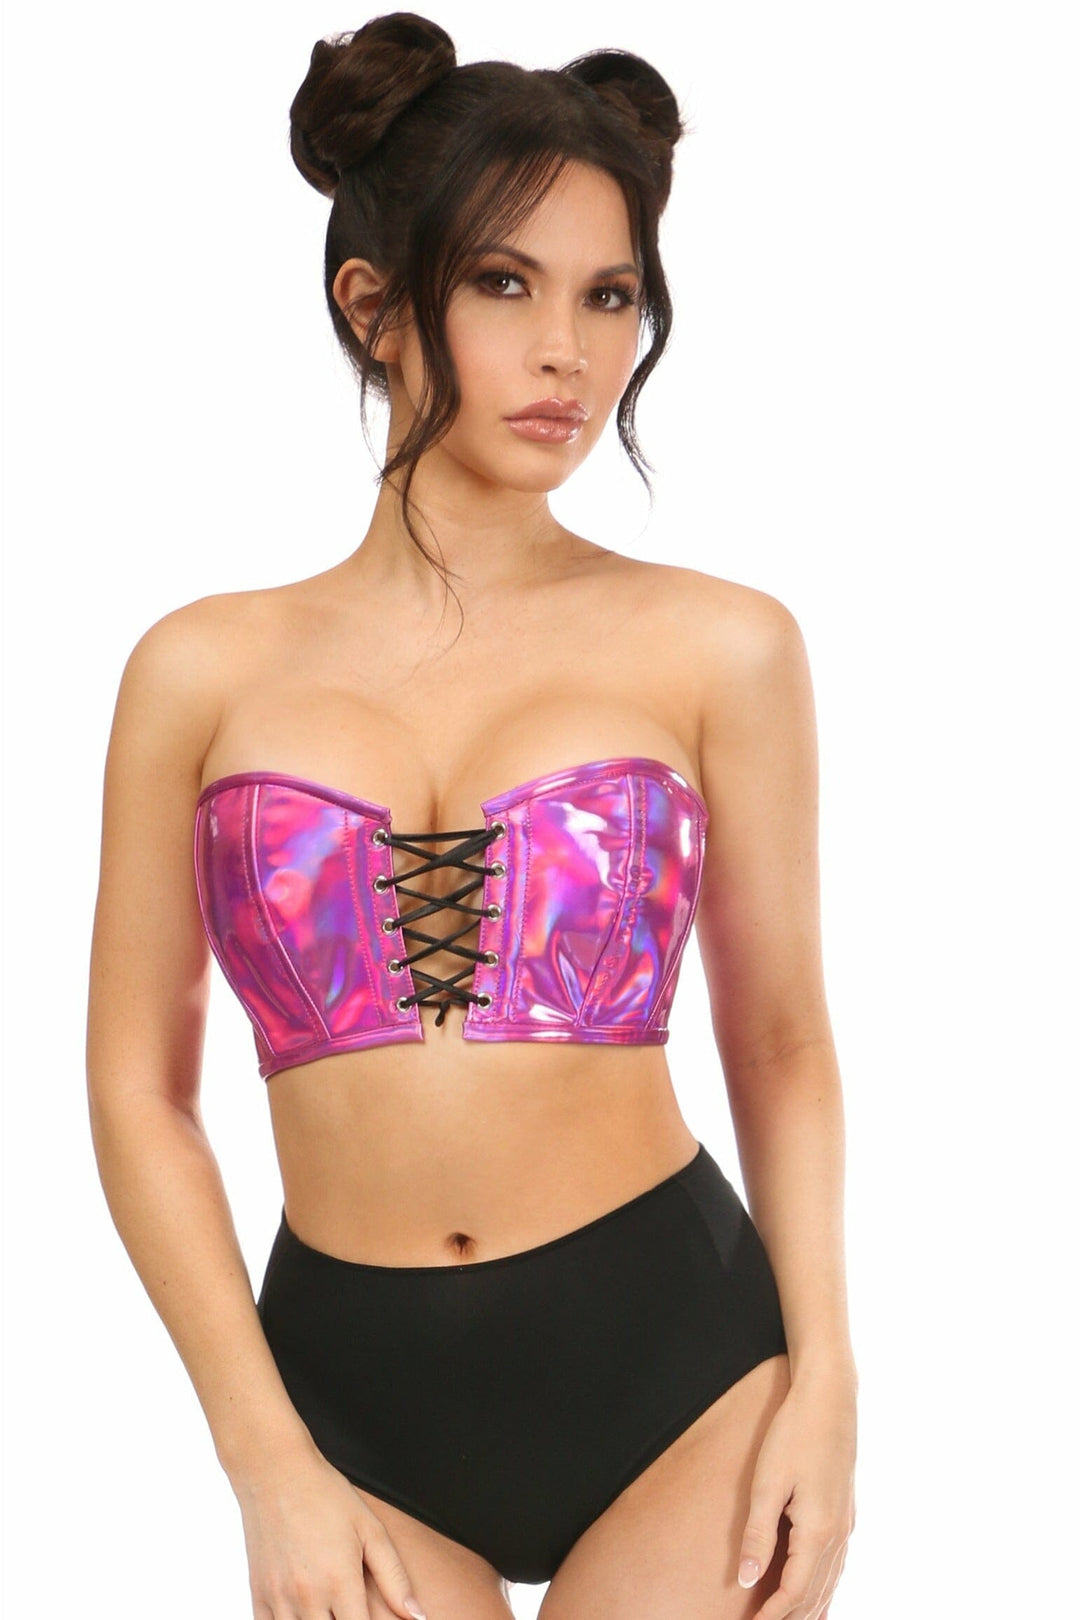 Lavish Fuchsia Holo Lace-Up Bustier Top-Bustier Tops-Daisy Corsets-Hologram-S-SEXYSHOES.COM